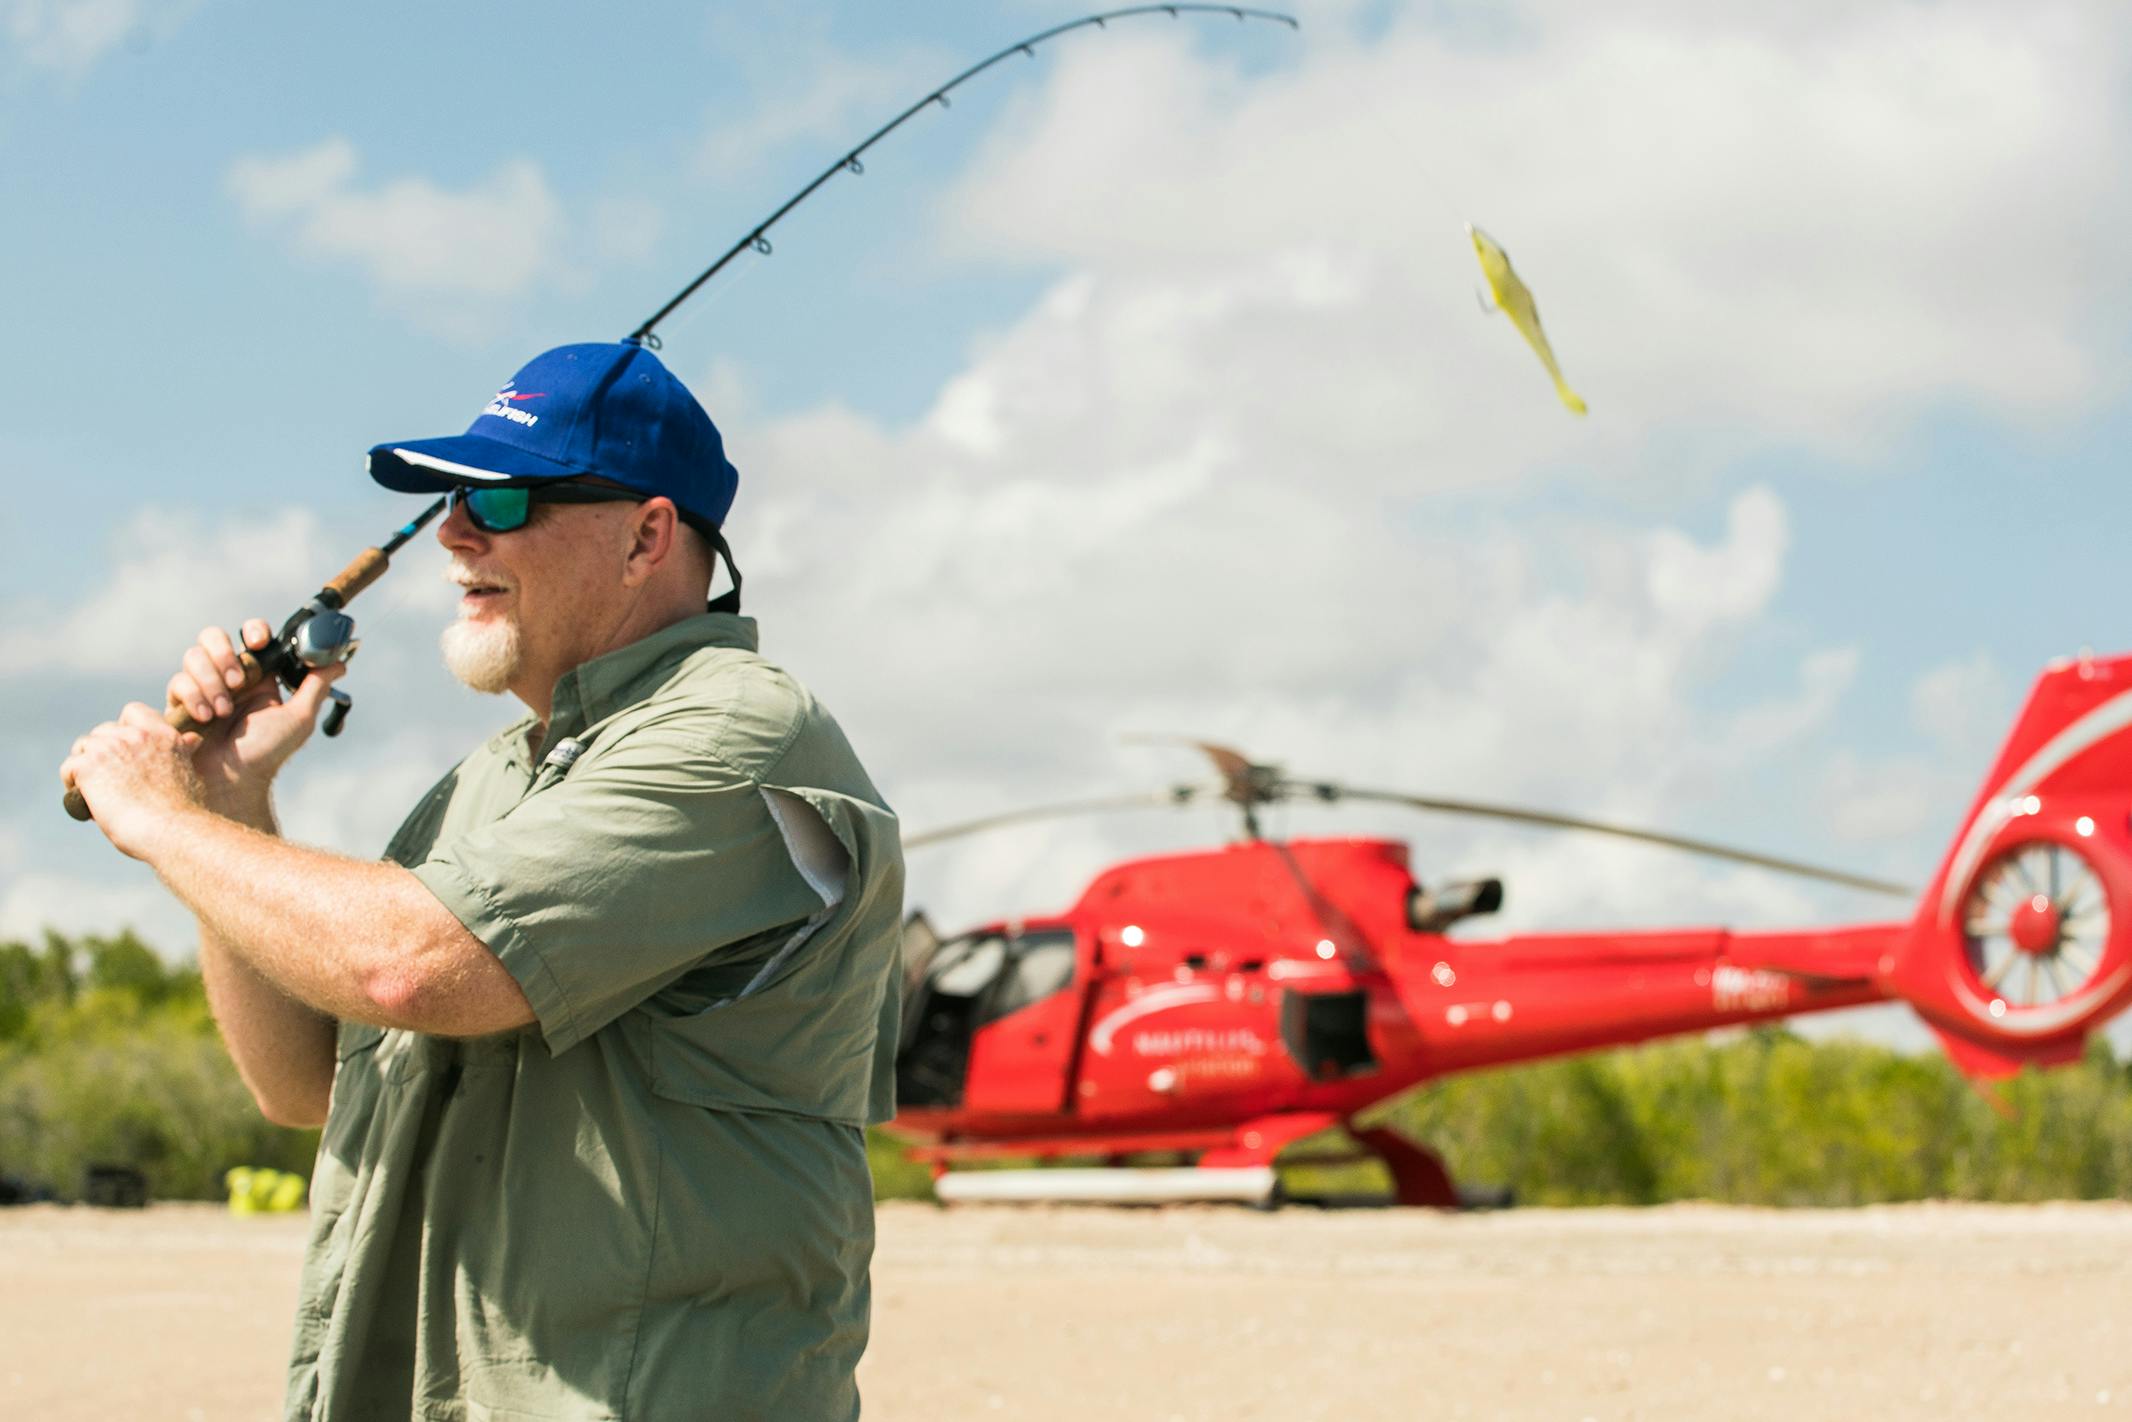 Man casting a fishing rod in front of a helicopter